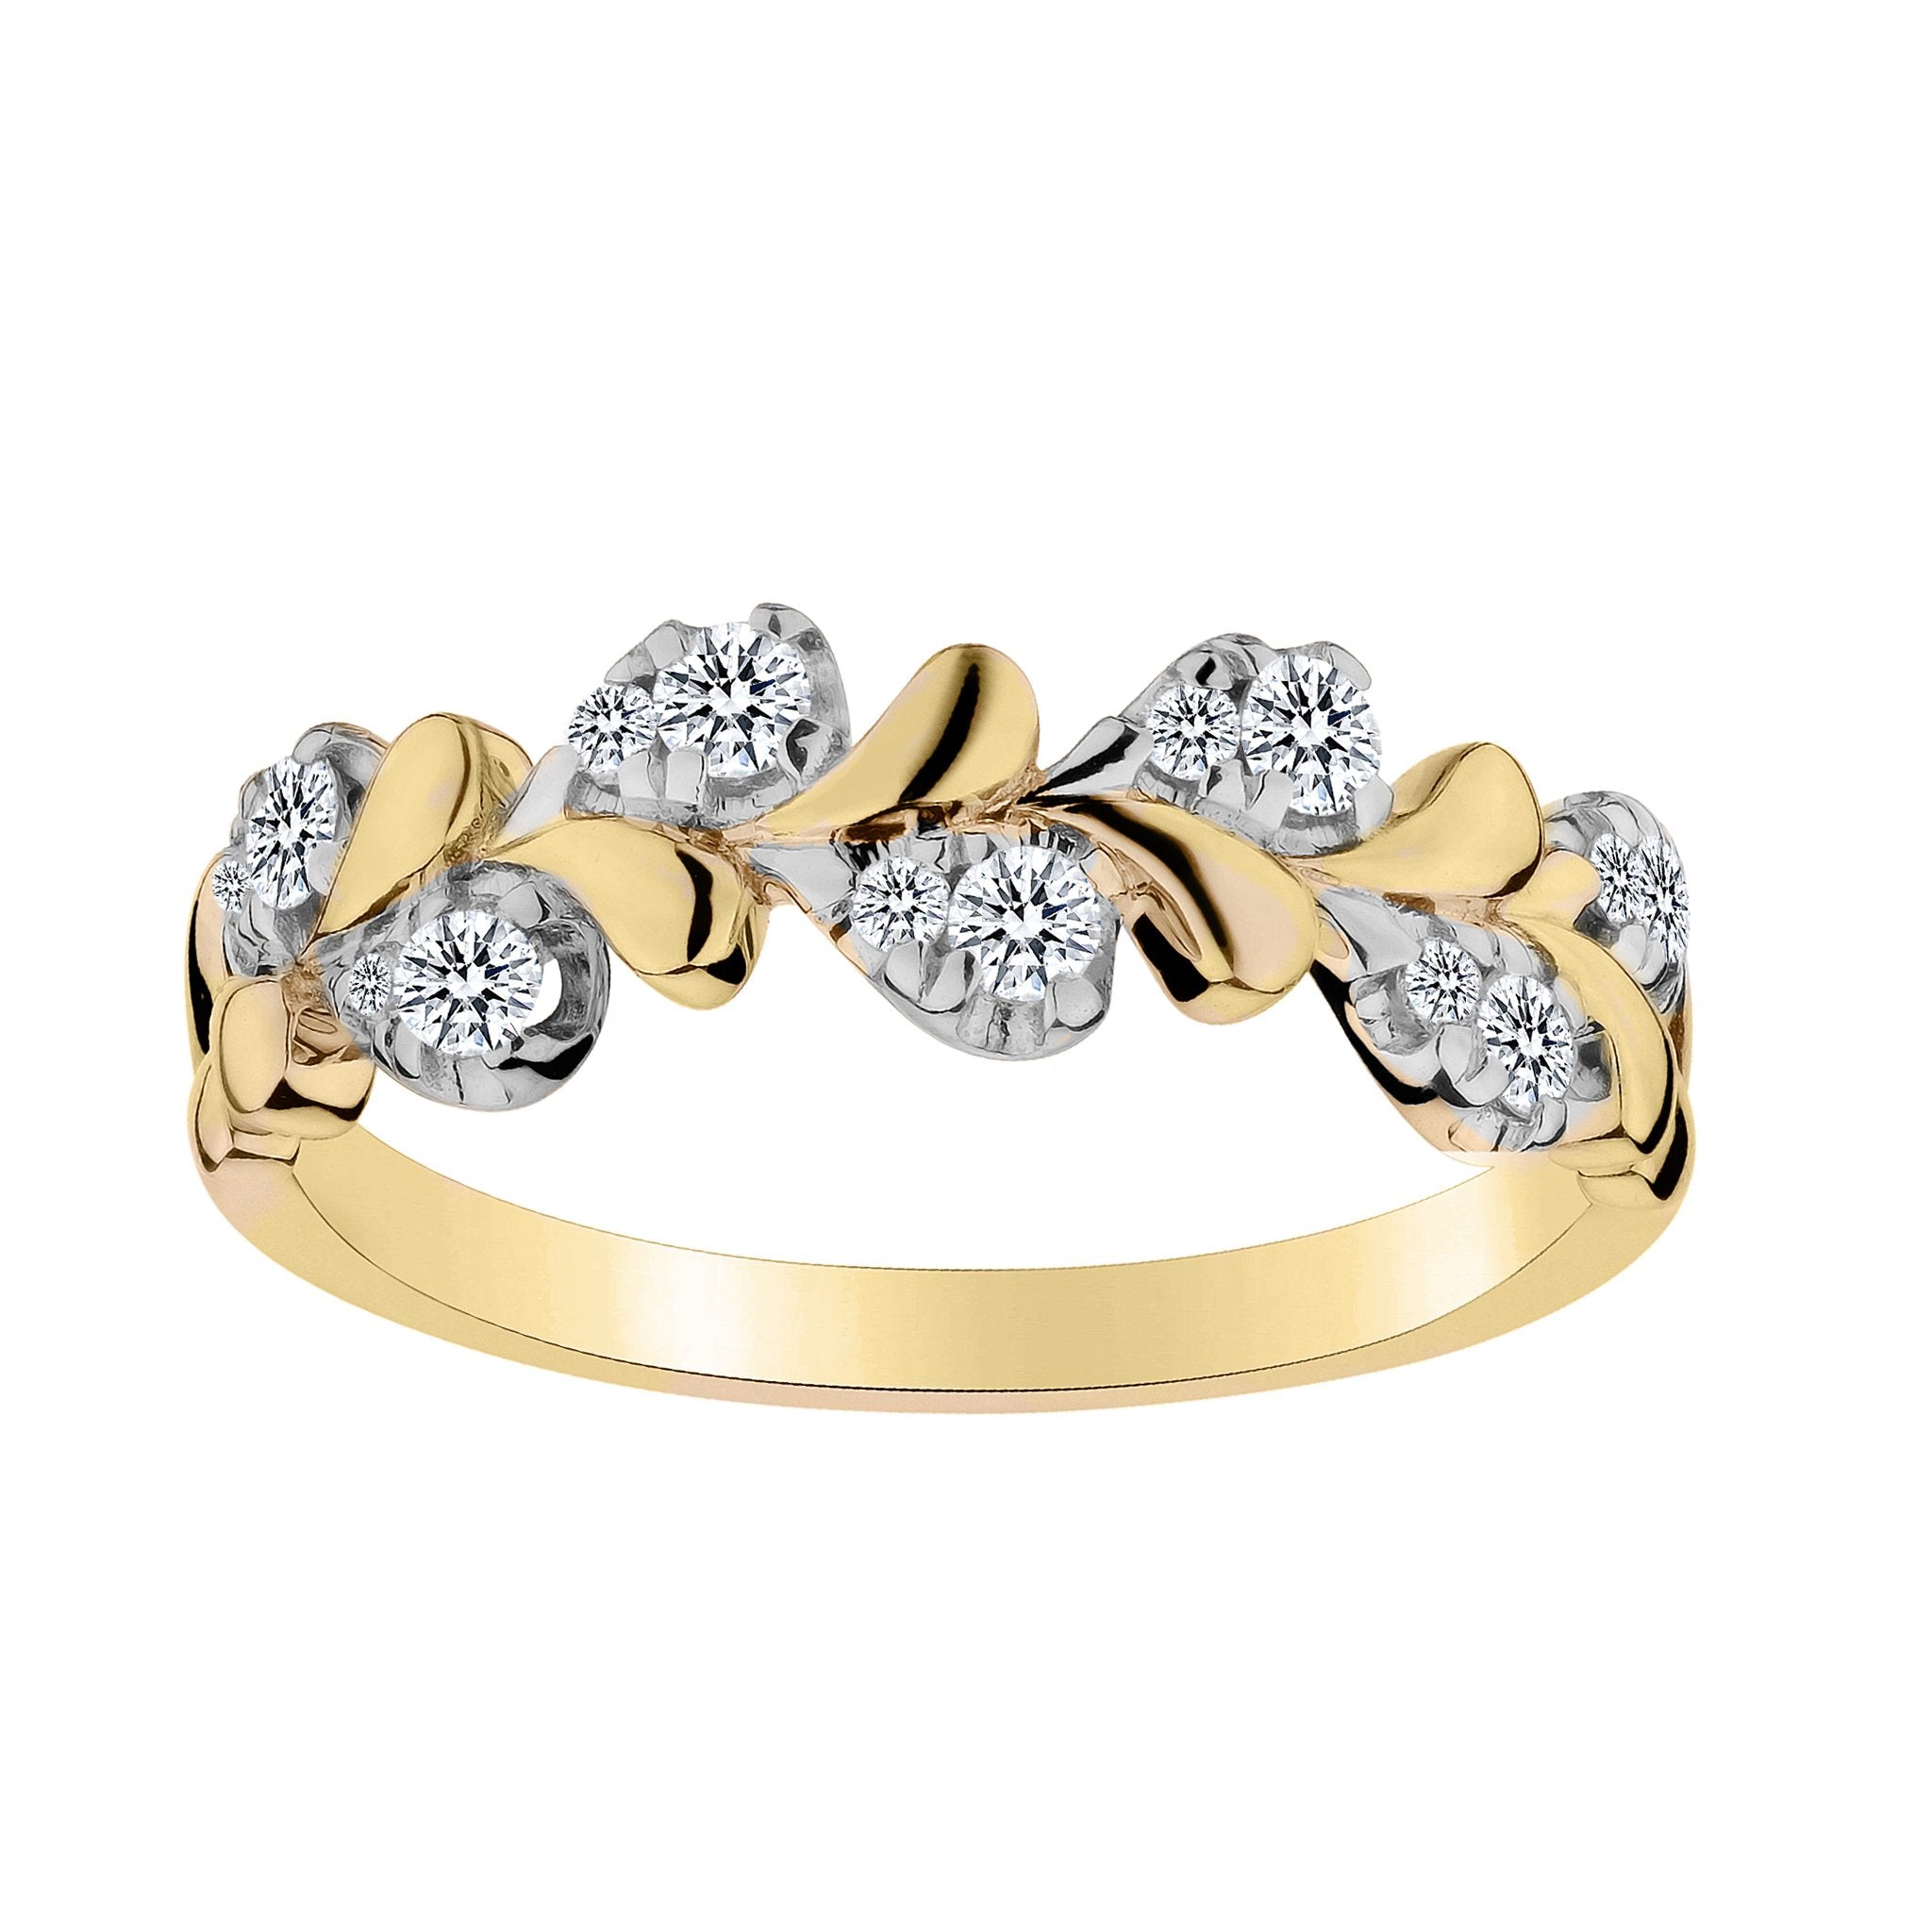 .40 CARAT DIAMOND RING, 10kt YELLOW GOLD. Fashion Rings - Griffin Jewellery Designs